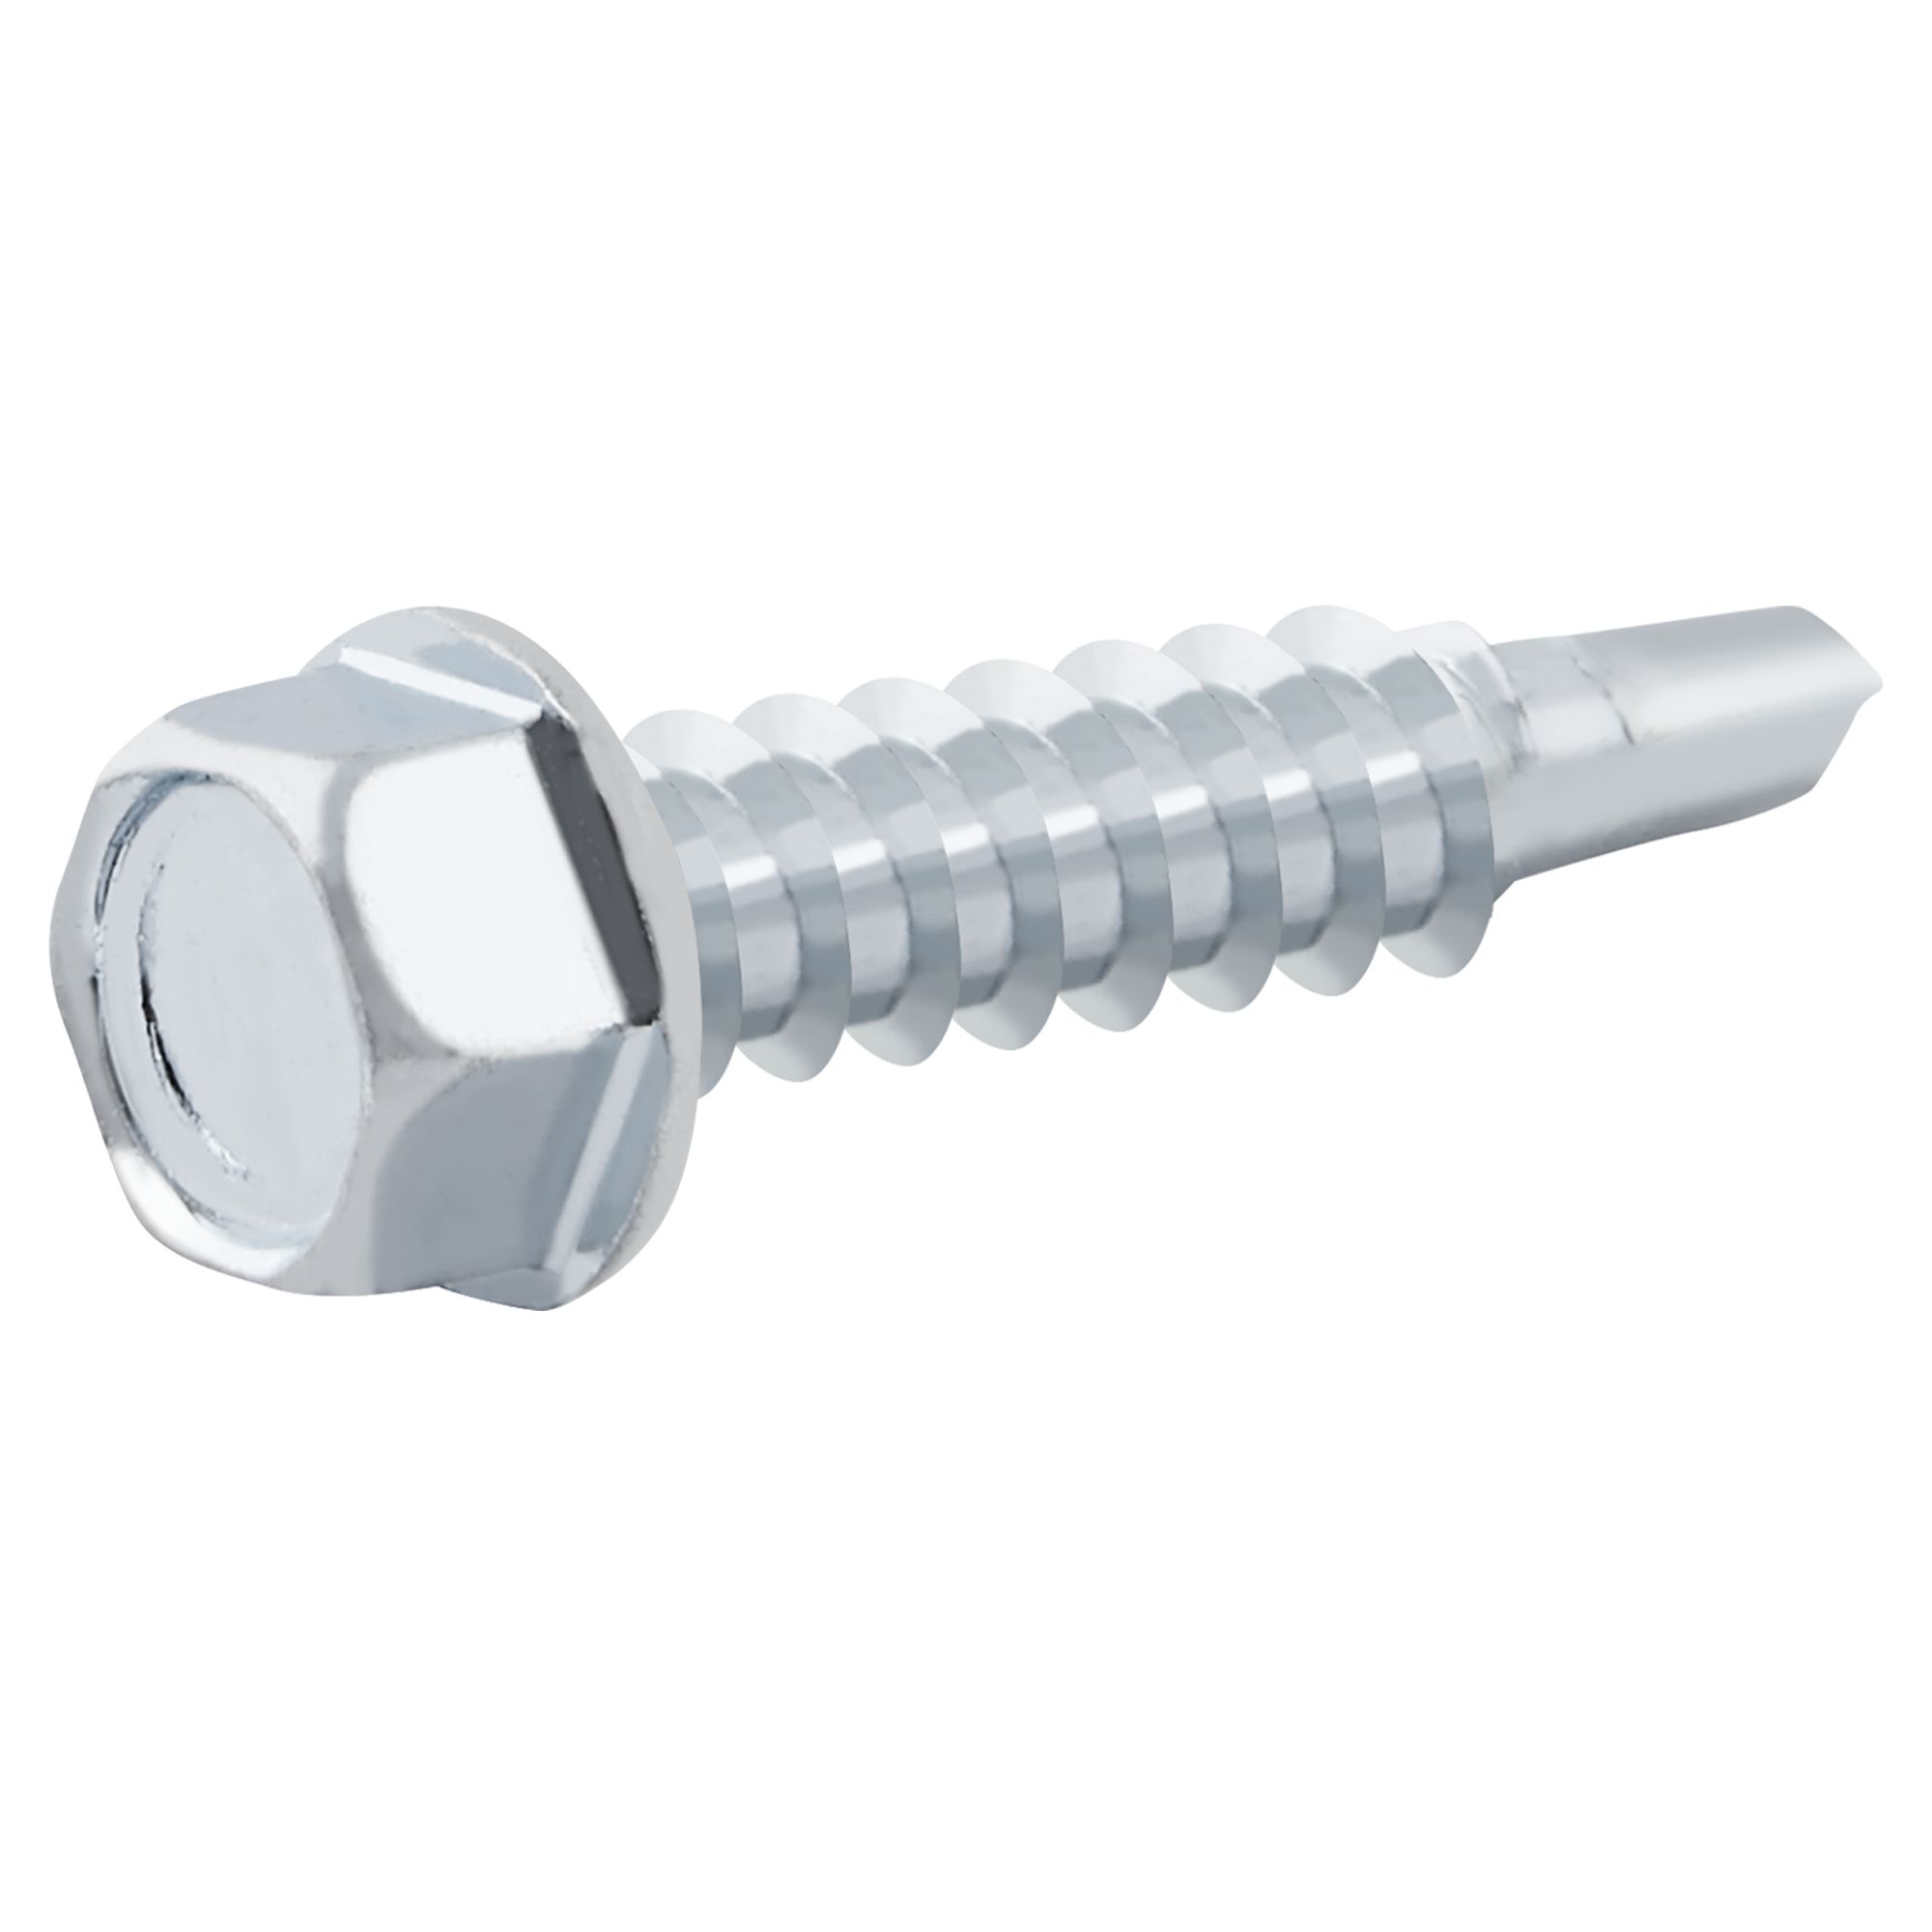 Diall Hex Zinc-plated Carbon steel Screw (Dia)5.5mm (L)25mm, Pack of 100